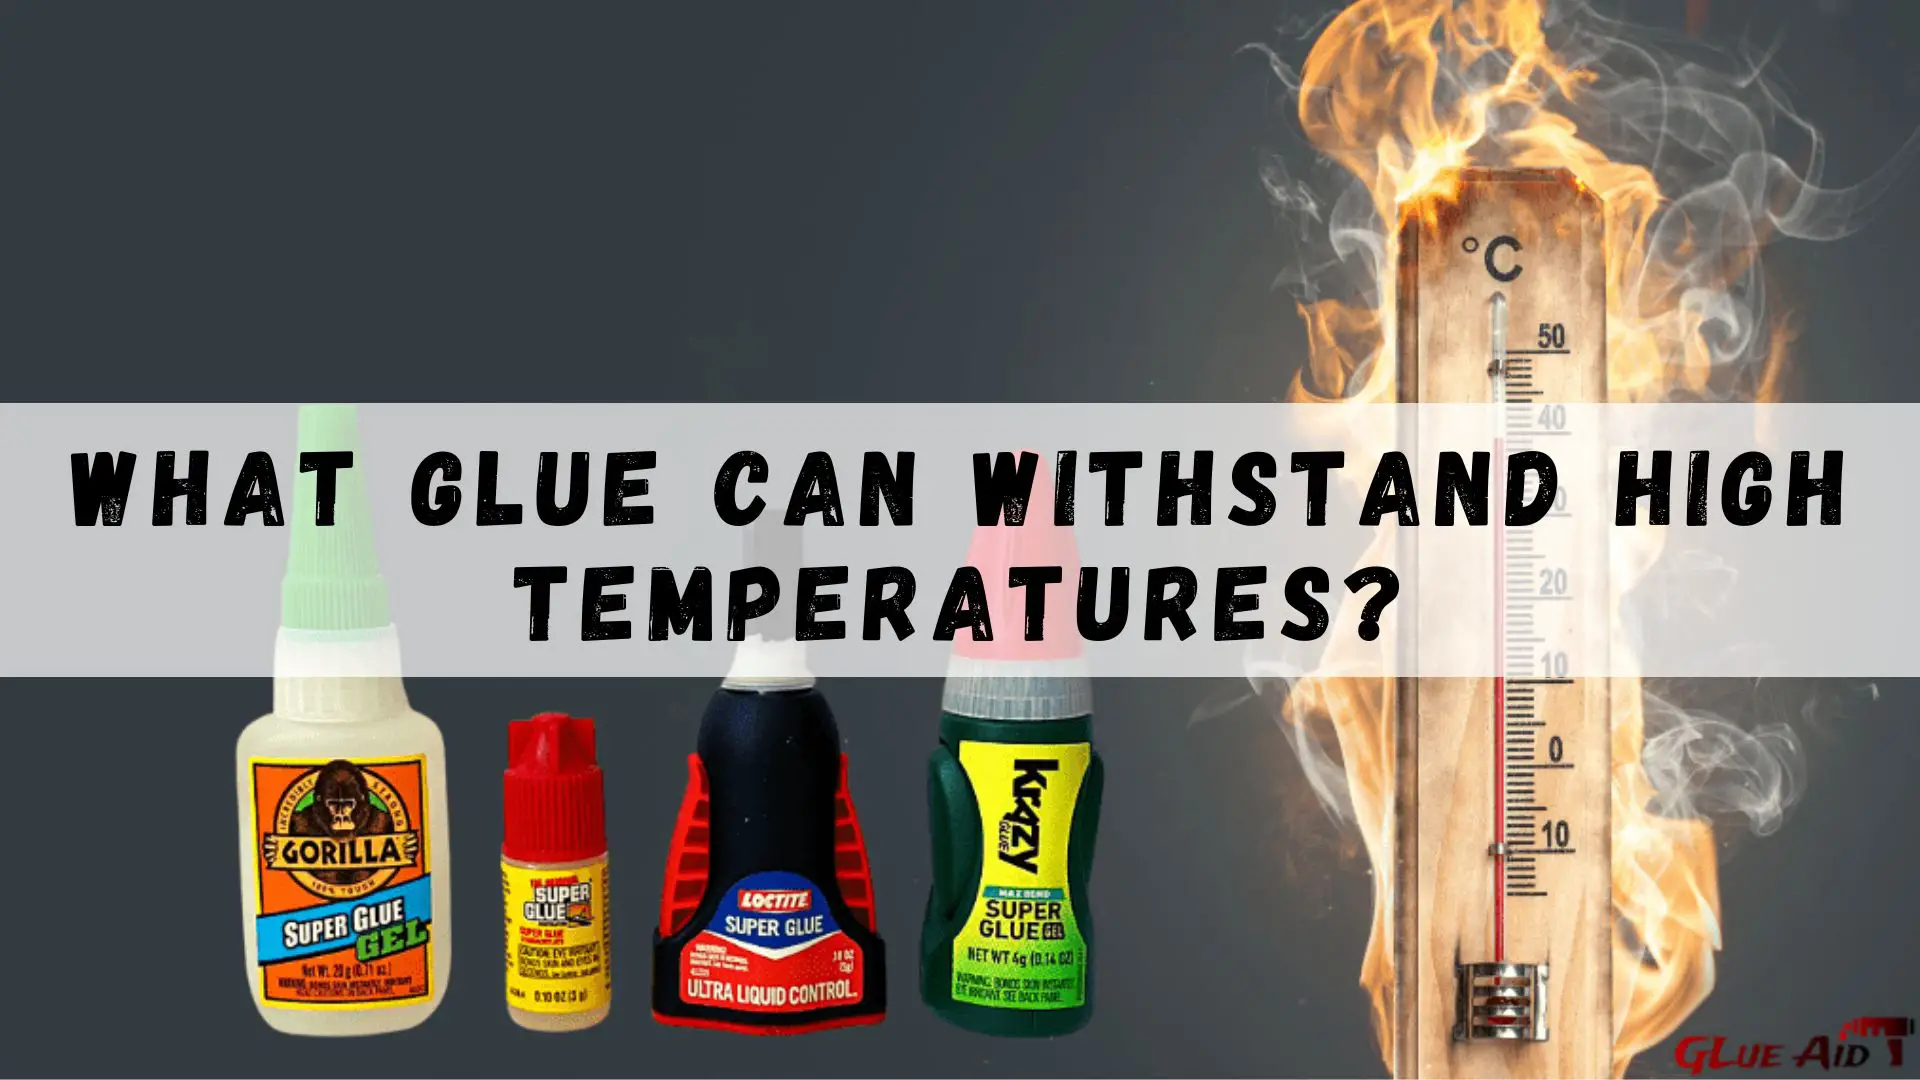 How Much Heat Can Super Glue Withstand